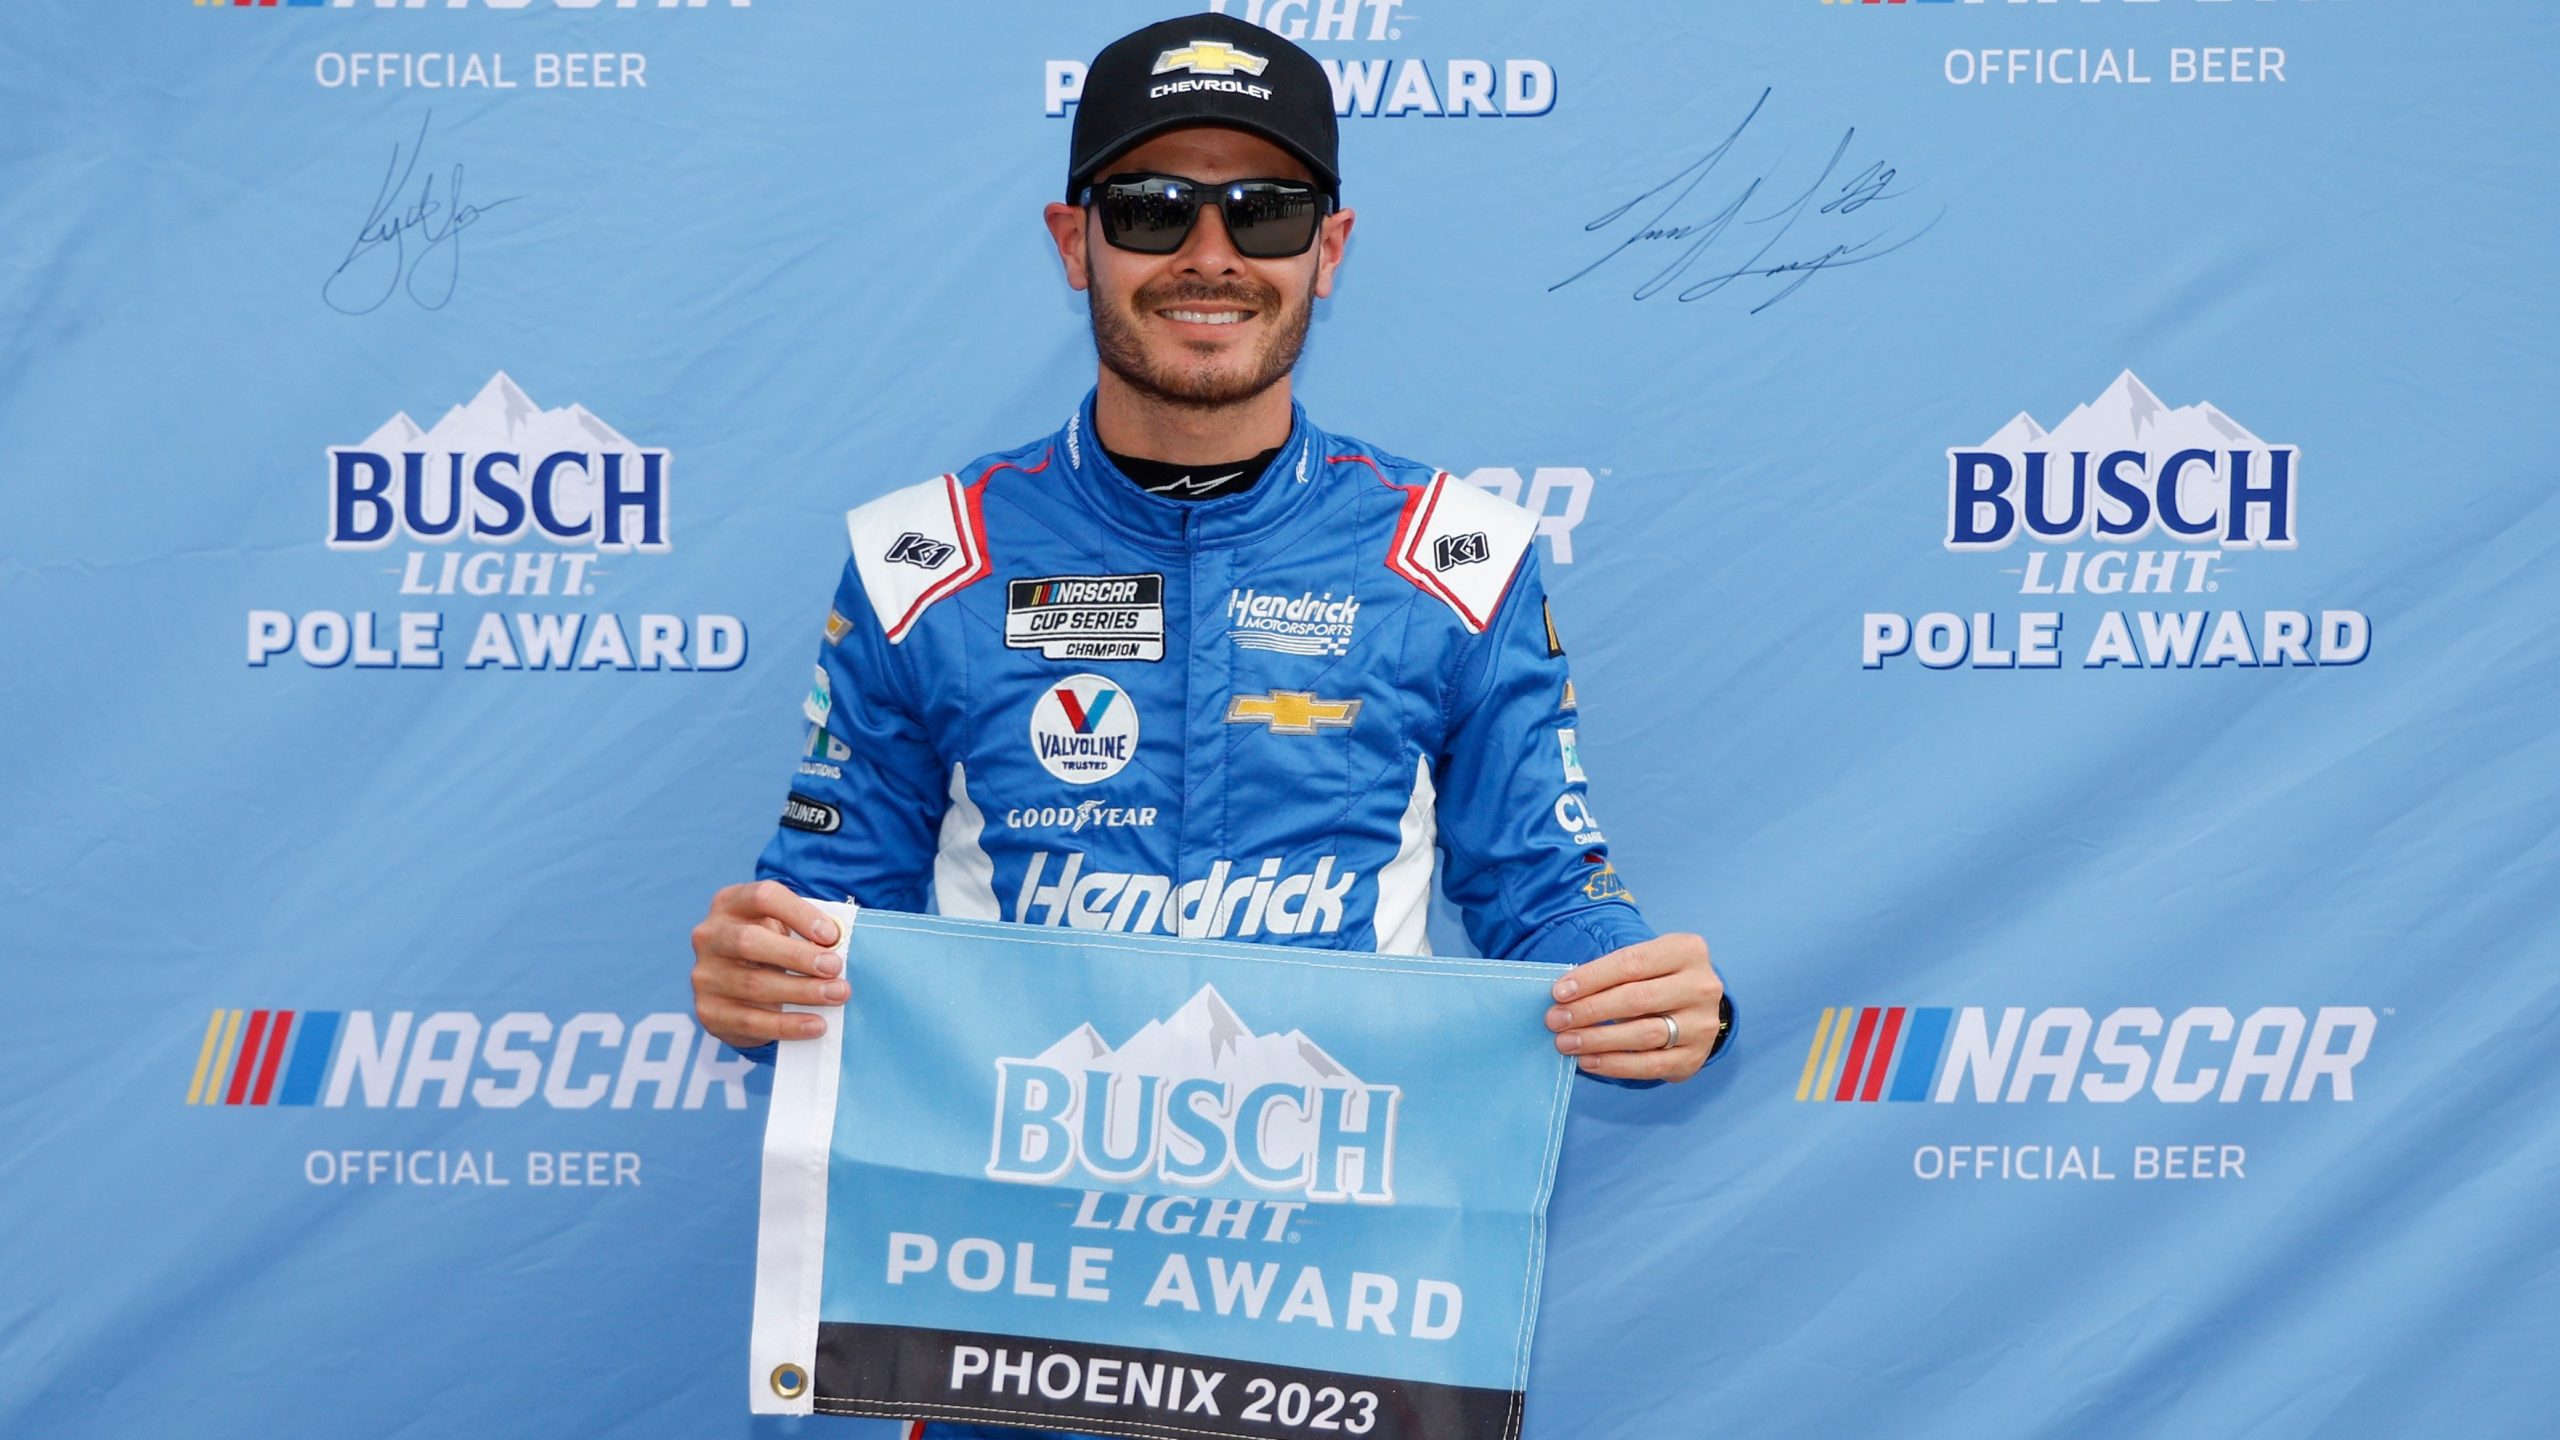 AVONDALE, ARIZONA - MARCH 11: Kyle Larson, driver of the #5 HendrickCars.com Chevrolet, poses for photos after winning the pole award during qualifying for the NASCAR Cup Series United Rentals Work United 500 at Phoenix Raceway on March 11, 2023 in Avondale, Arizona. (Photo by Chris Graythen/Getty Images)